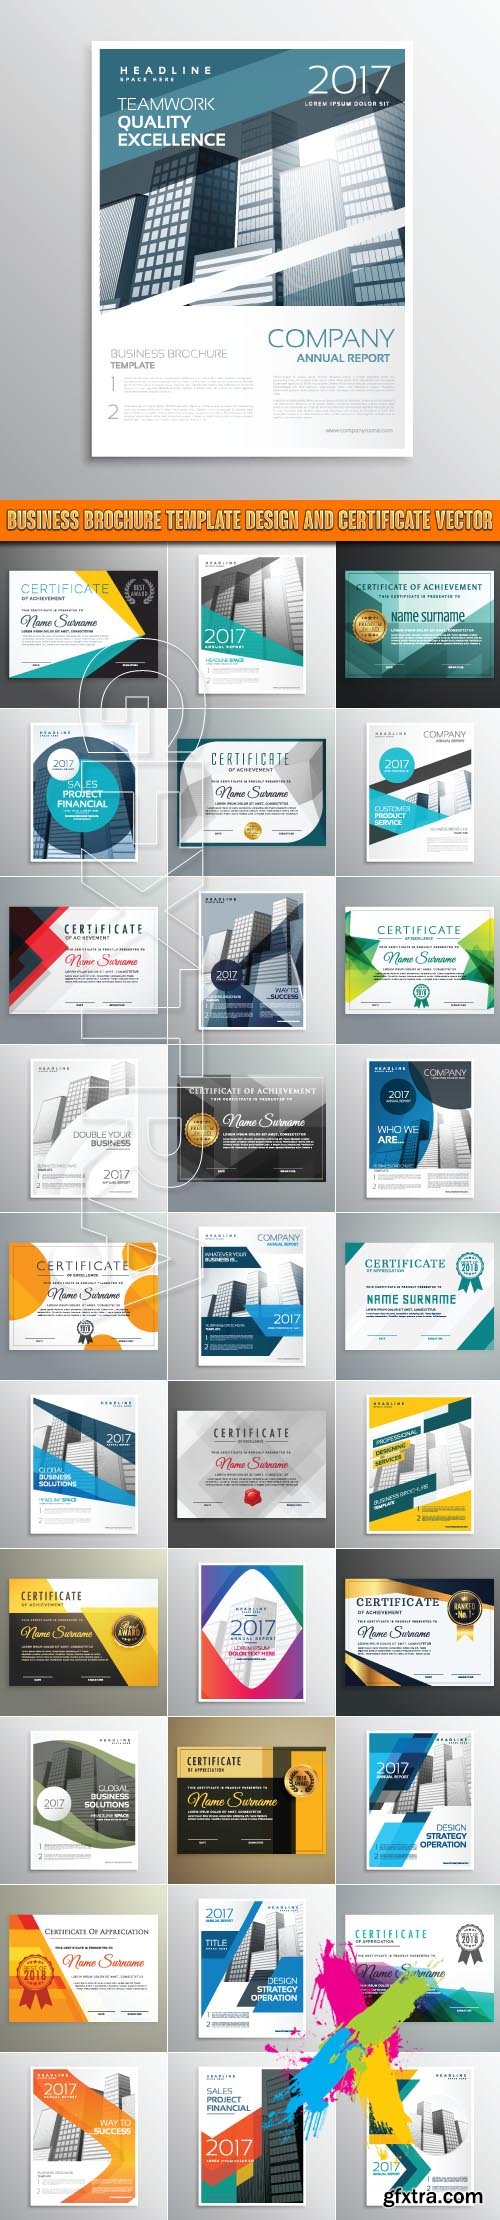 Business brochure template design and certificate vector